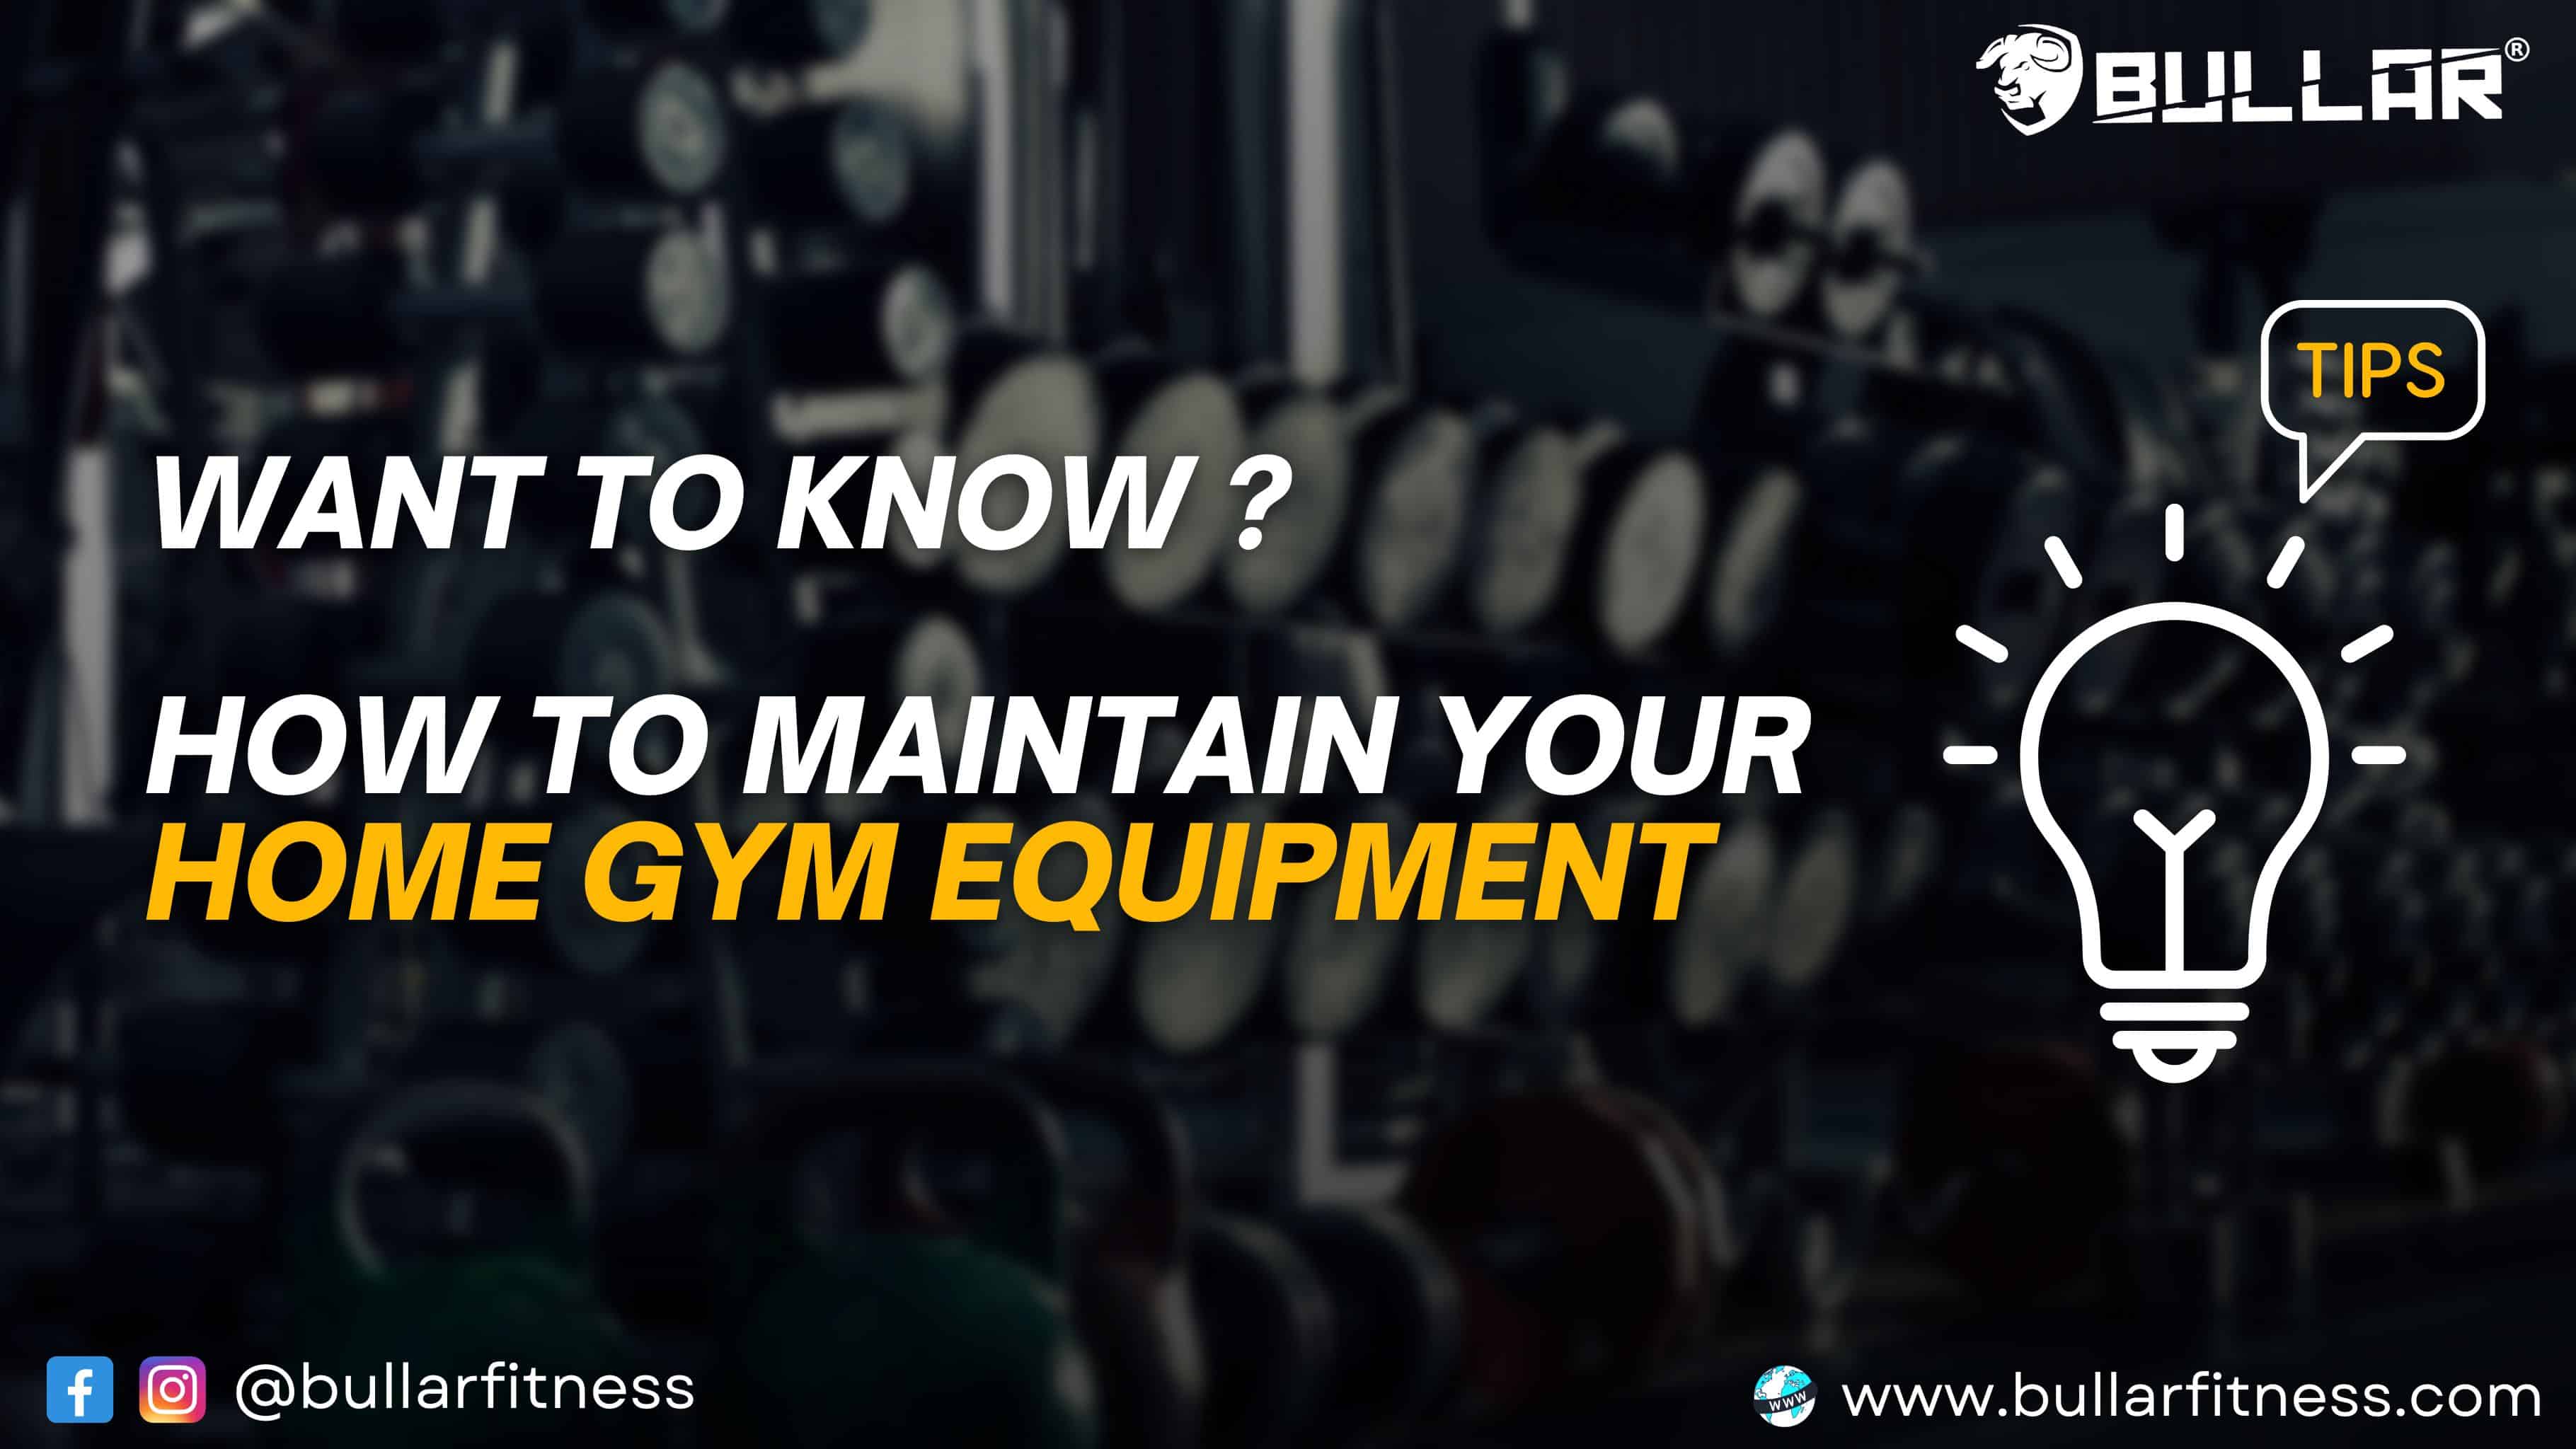 How to MAINTAIN YOUR HOME GYM EQUIPMENT